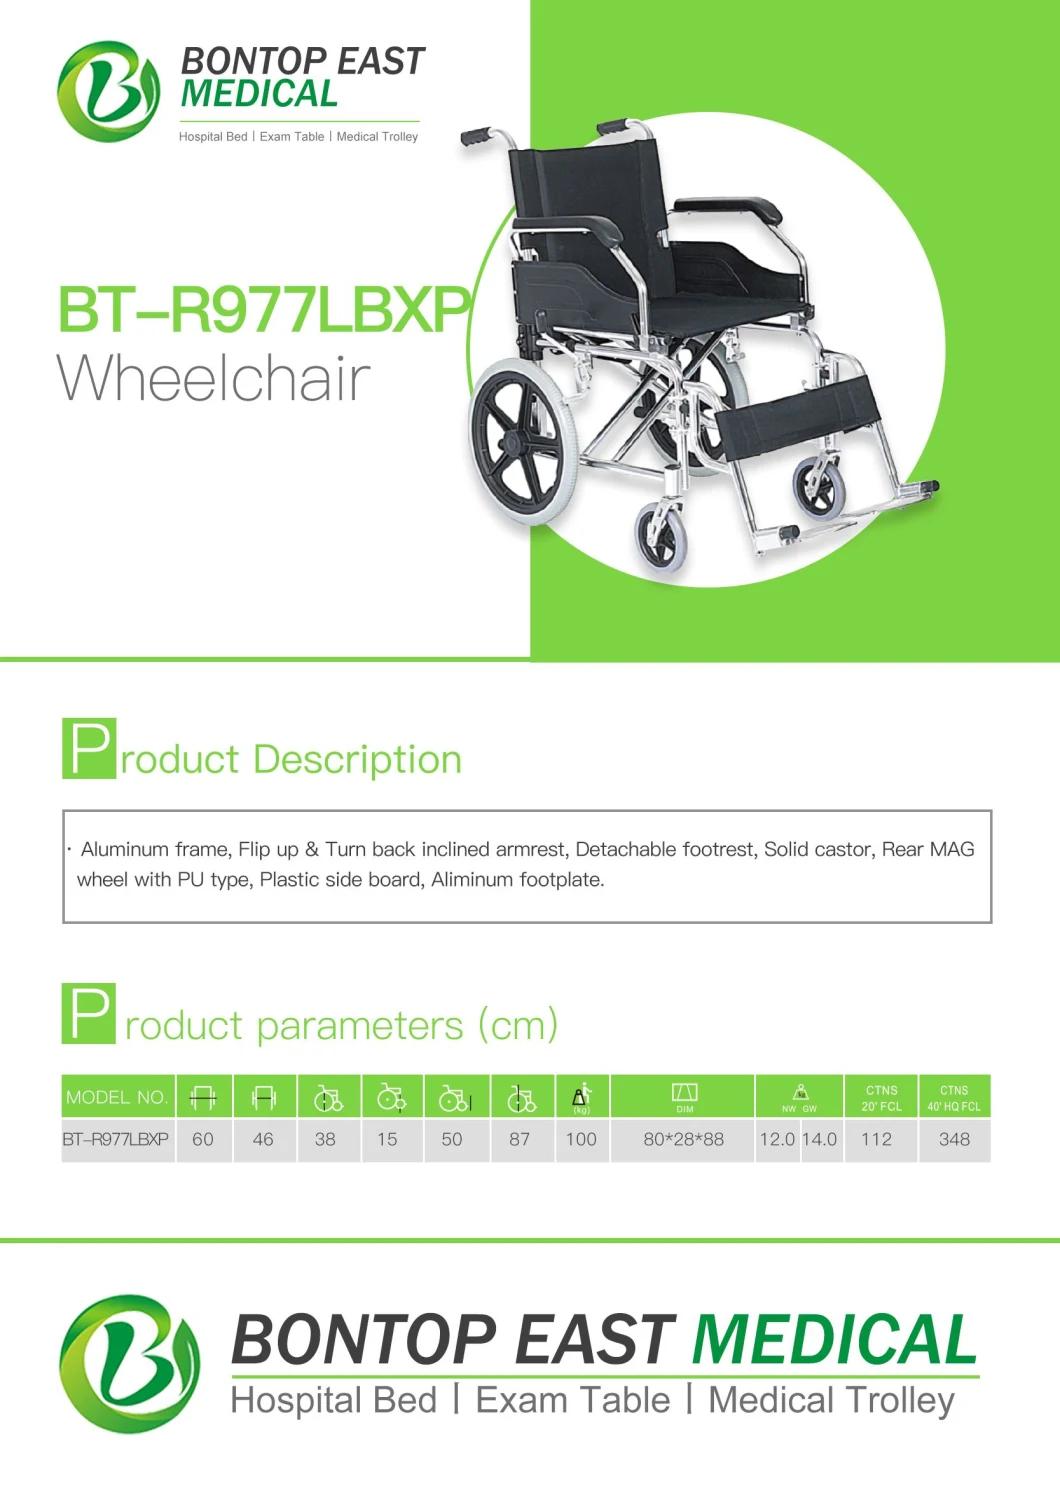 Comfortable Multi-Function High Quality Wheelchair for Patient Disabled People